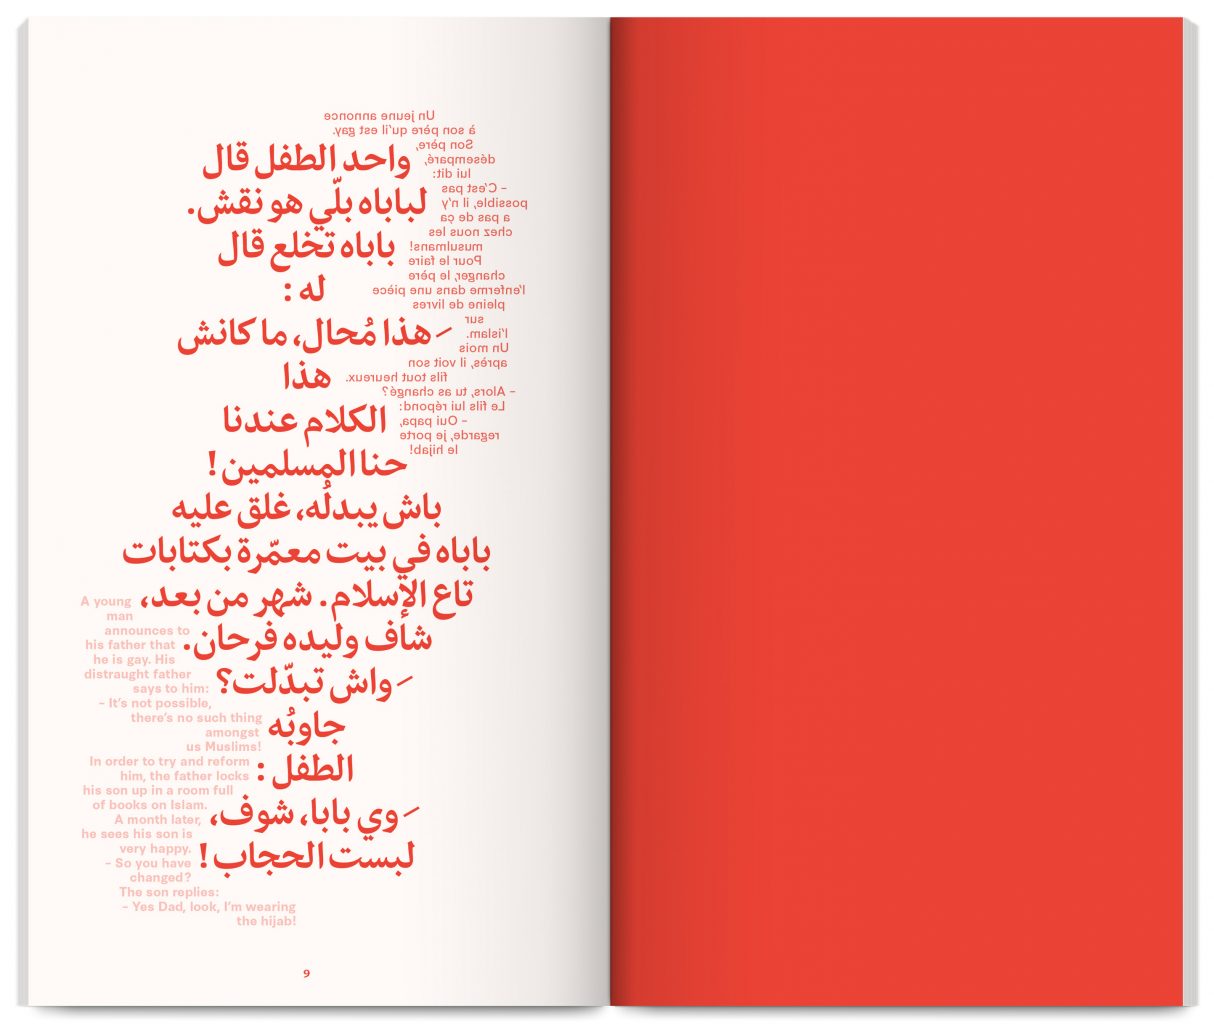 A Personal Collection of Jokes, artist book by Zineb Sedira, trilingual Algerian arabic, English, French, design by In the shade of a tree studio, founded by Sophie Demay and Maël Fournier Comte.